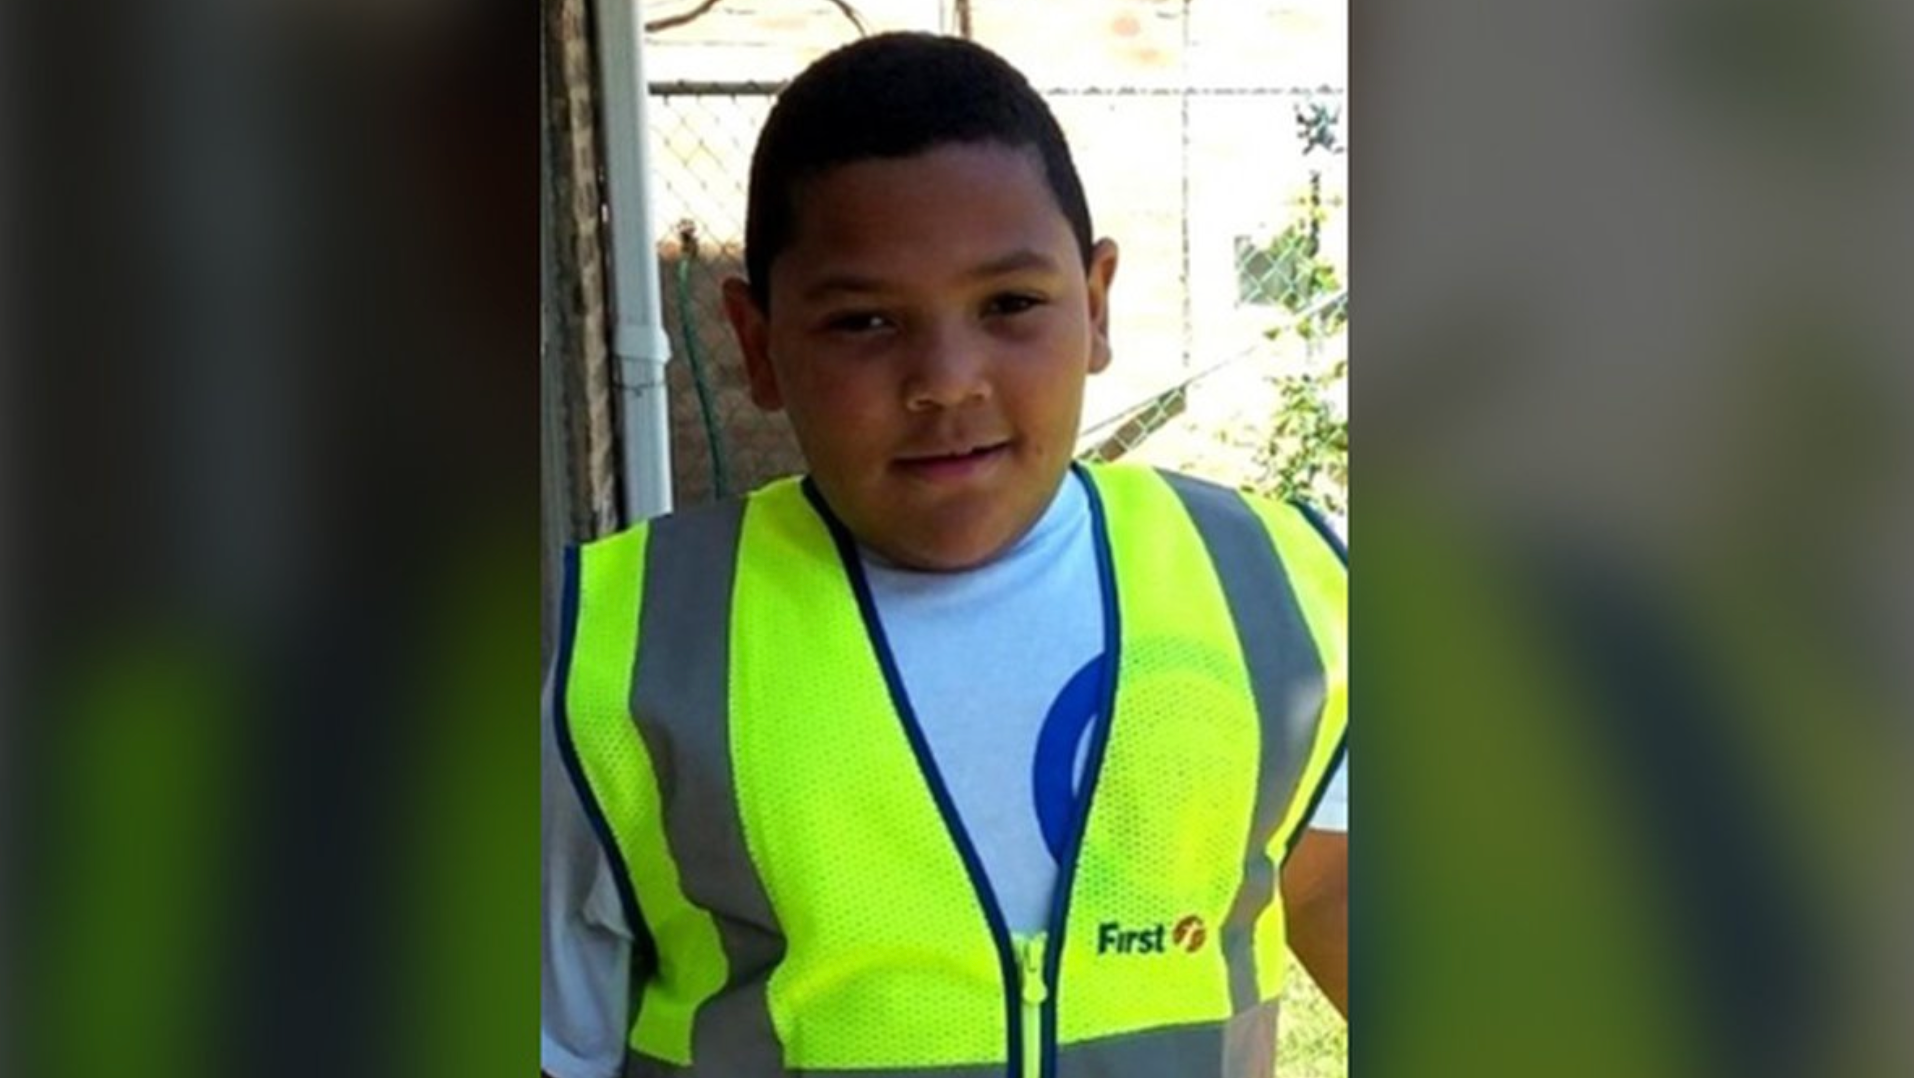 Michael Jaramillo, 10, was killed when the raft he was on flipped on the Raging River ride at Adventureland, Iowa, in 2021